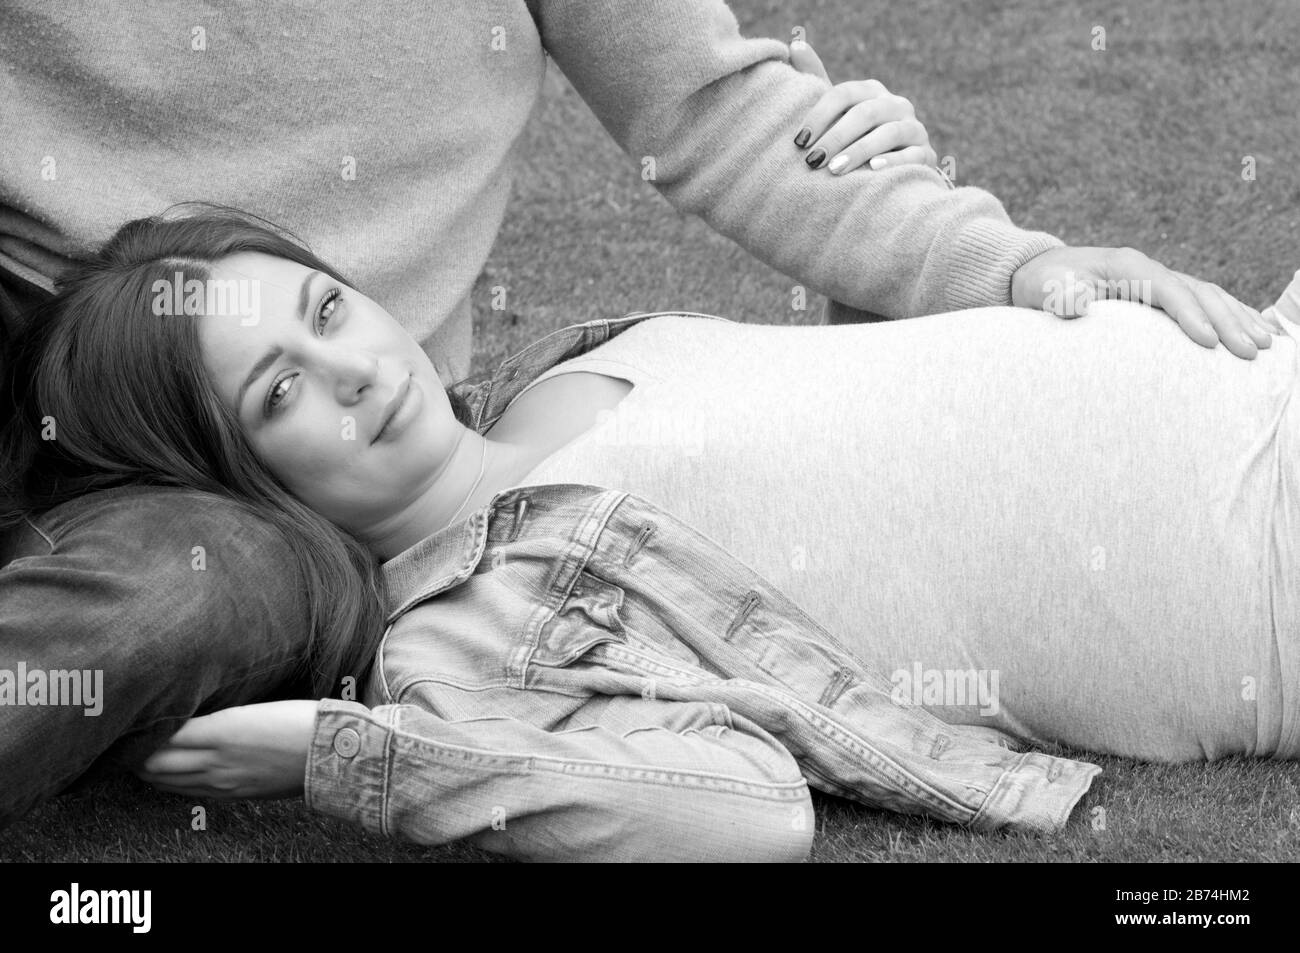 Black and white, close up, beautiful pregnant young woman lying down on the grass with her partner sitting next to her Stock Photo